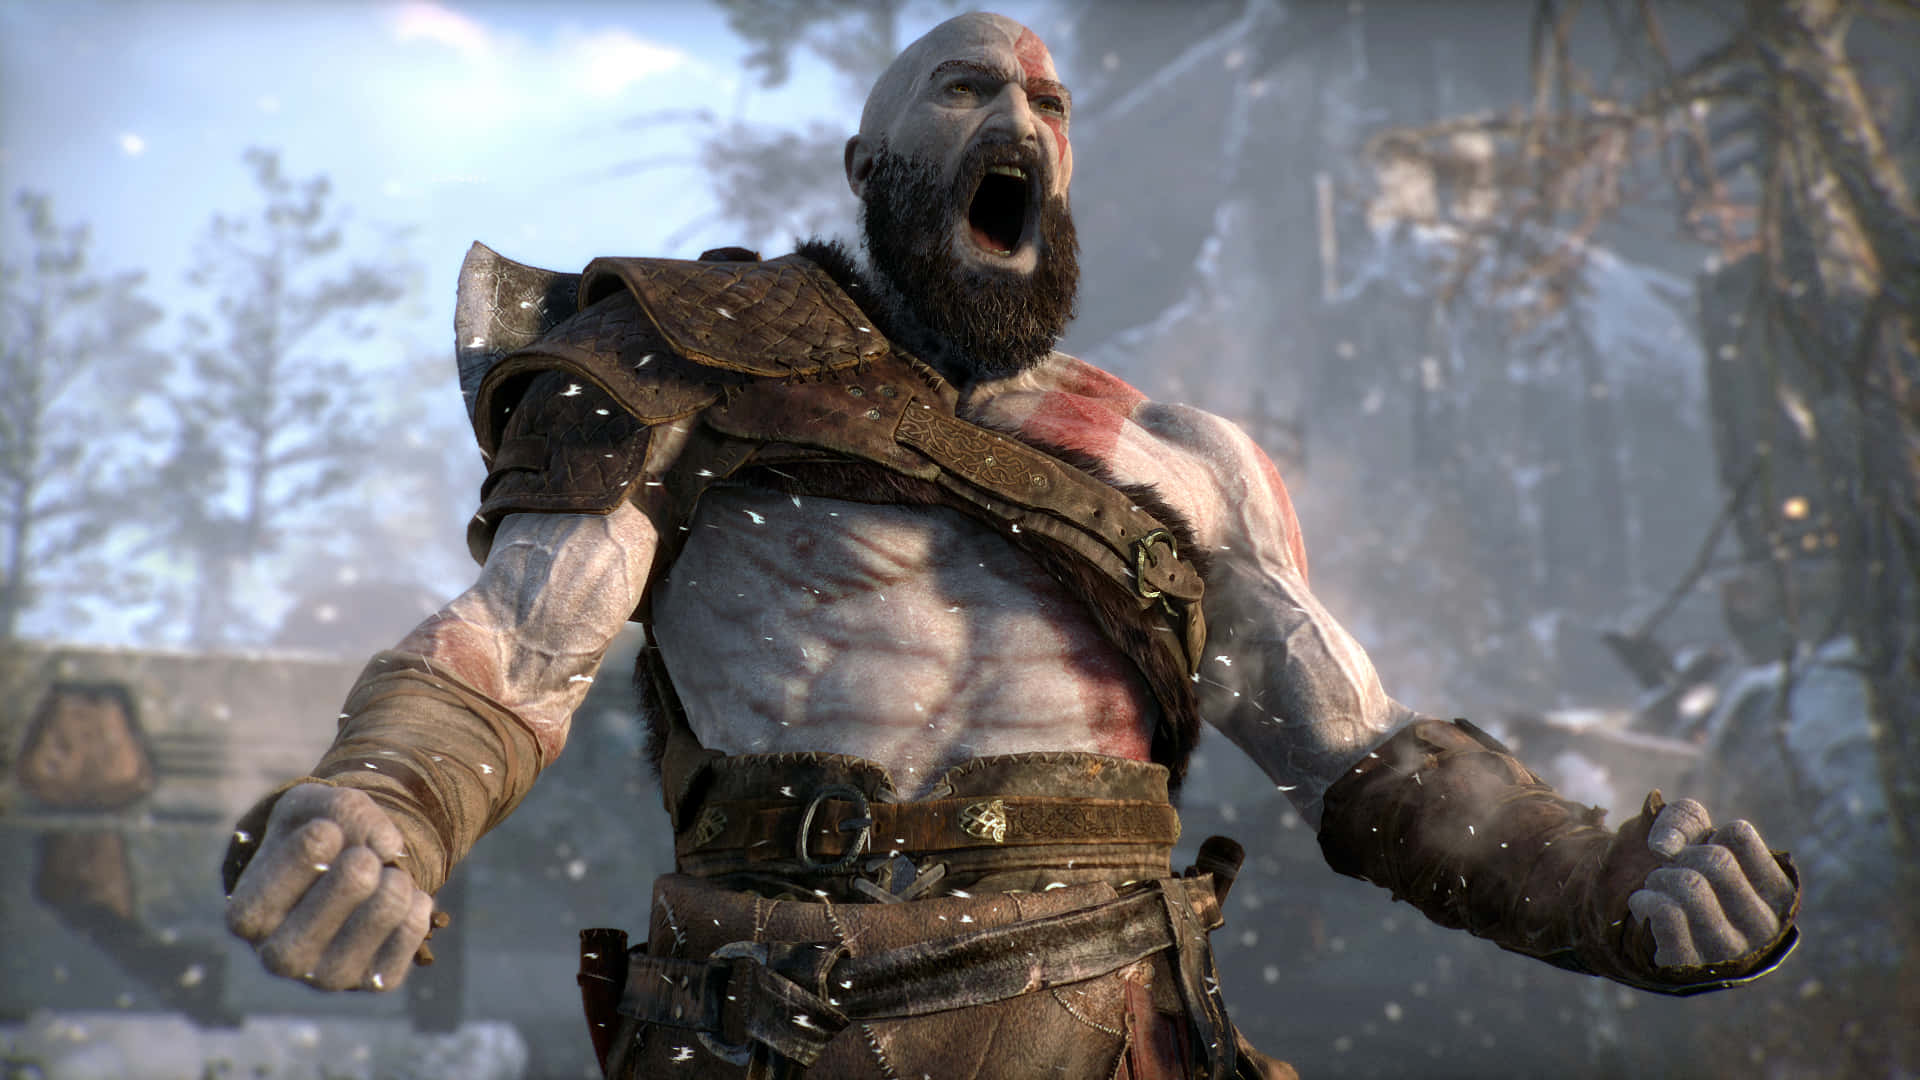 Don't mess with Kratos - He's ready to fight in God of War 5 Wallpaper